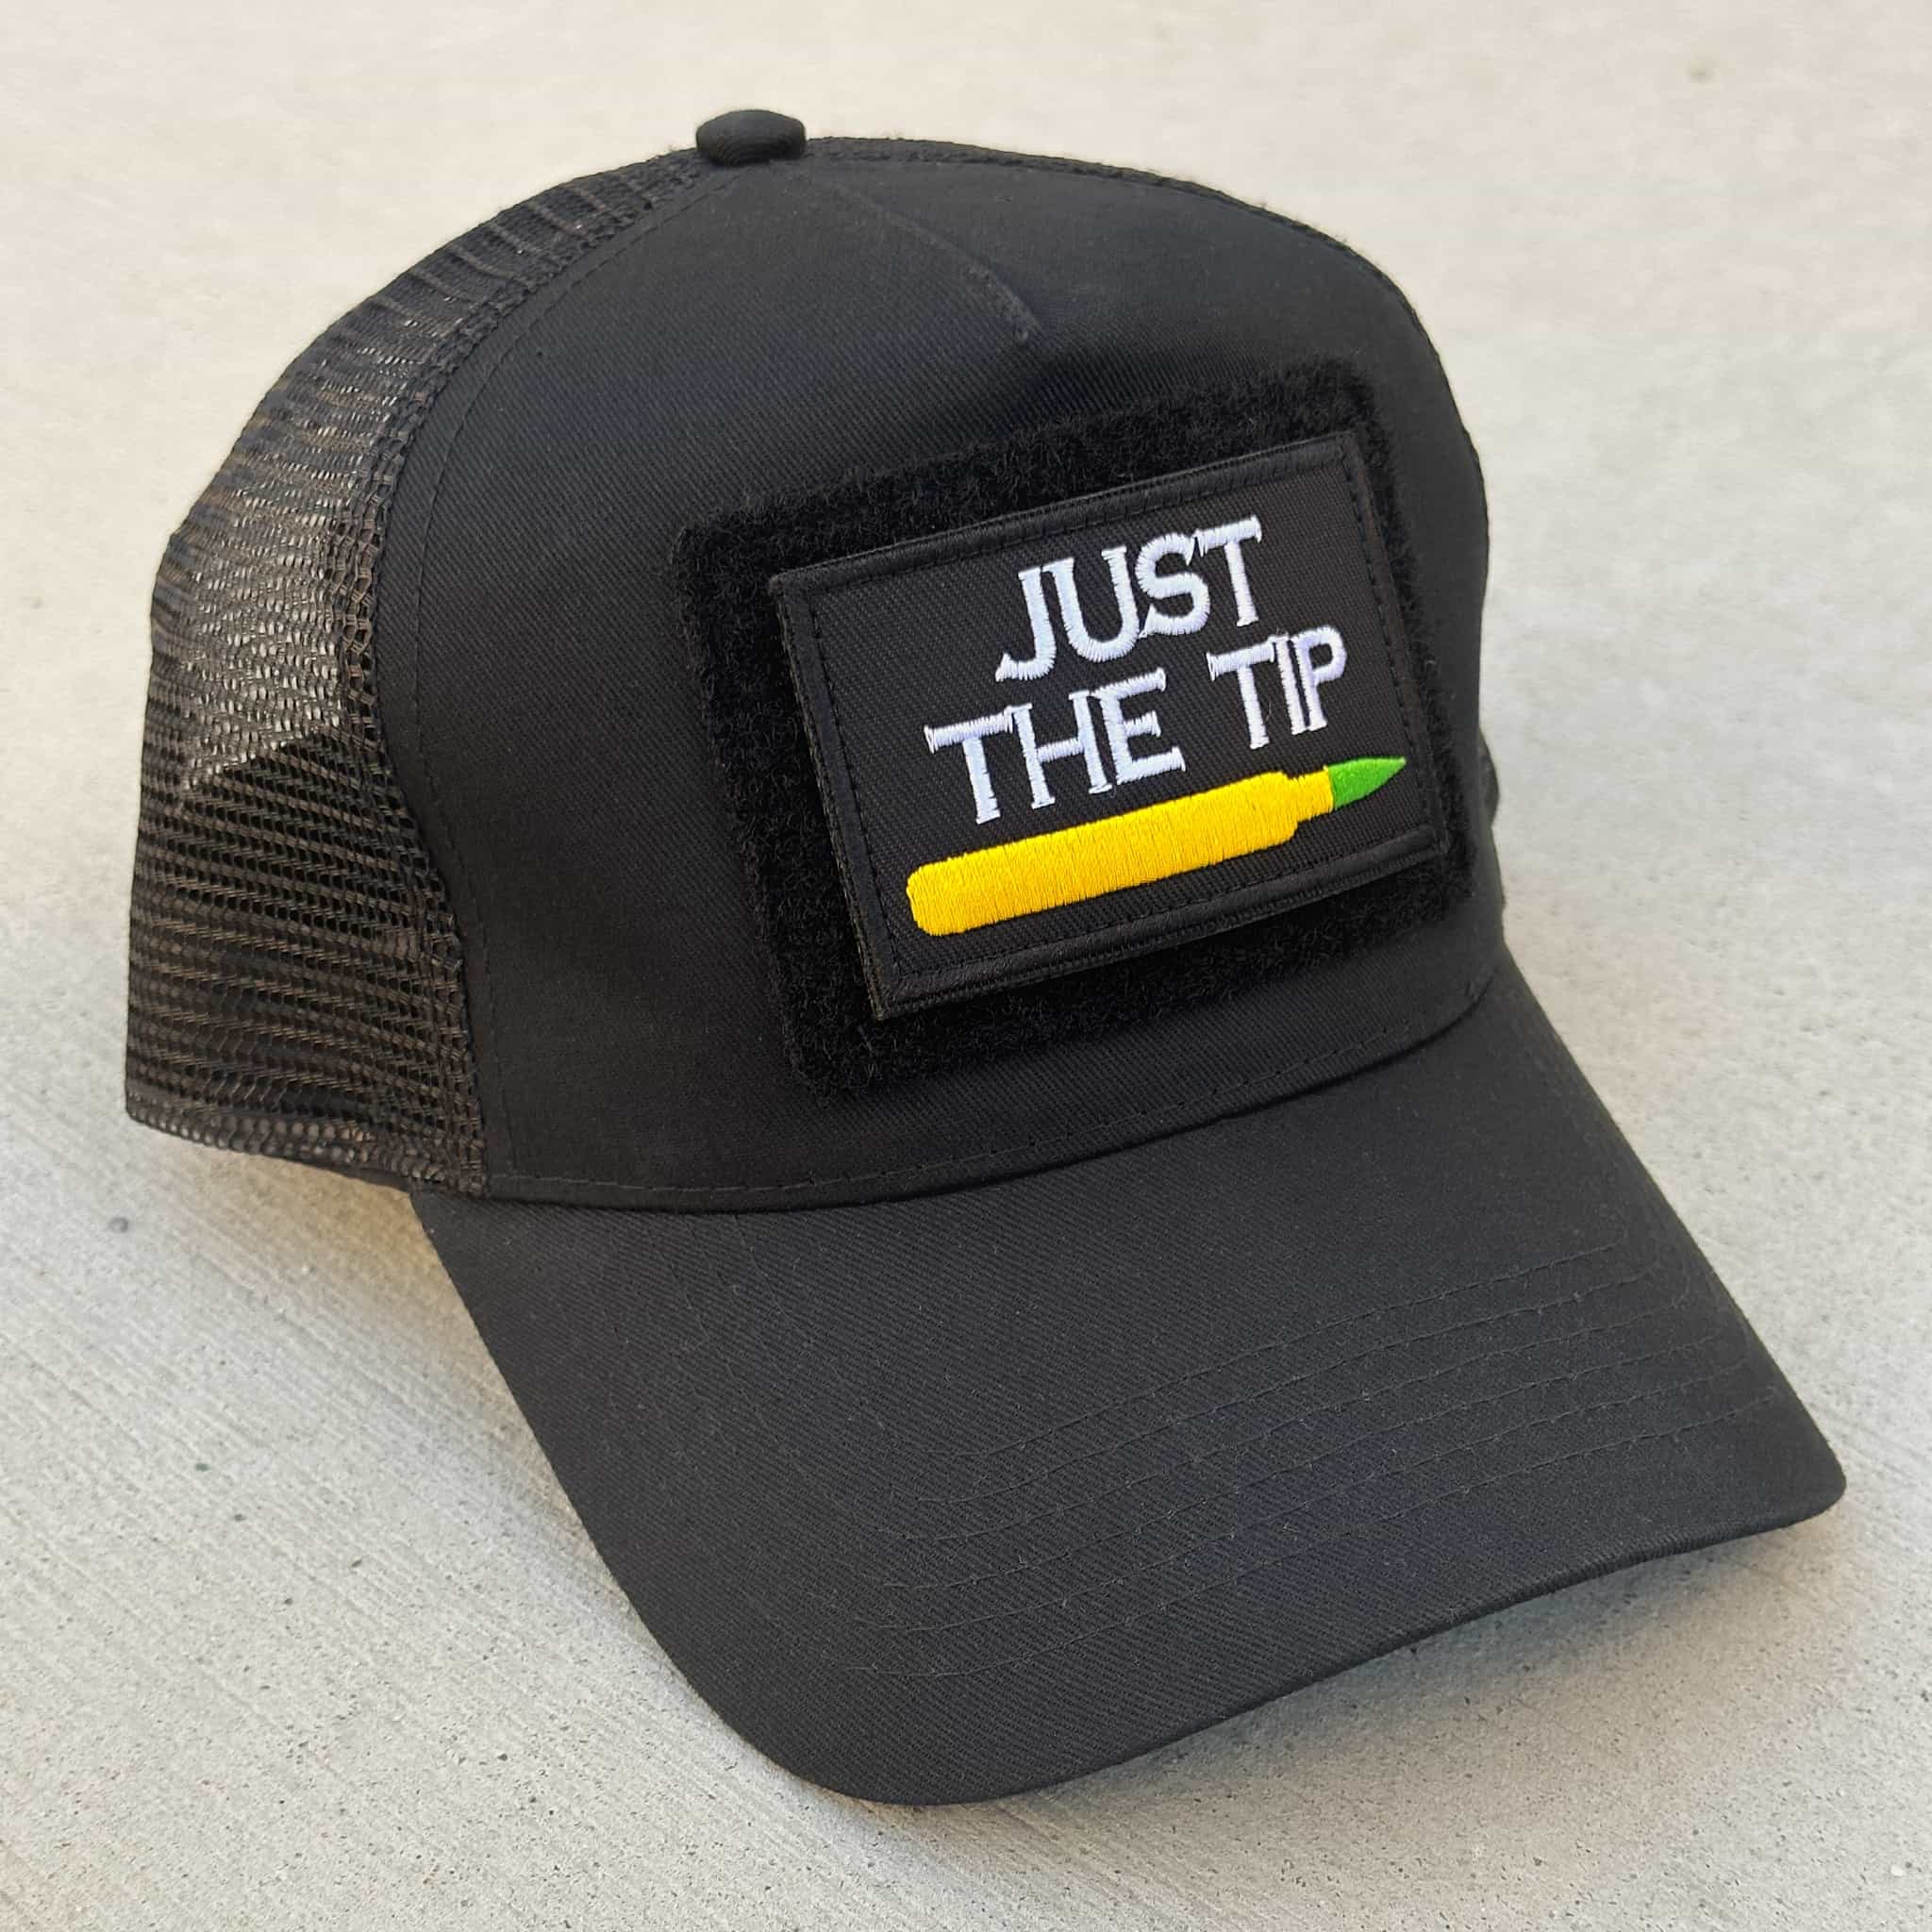 The Blank Canvas Snapback cap in black with the 'Just the Tip' patch attached